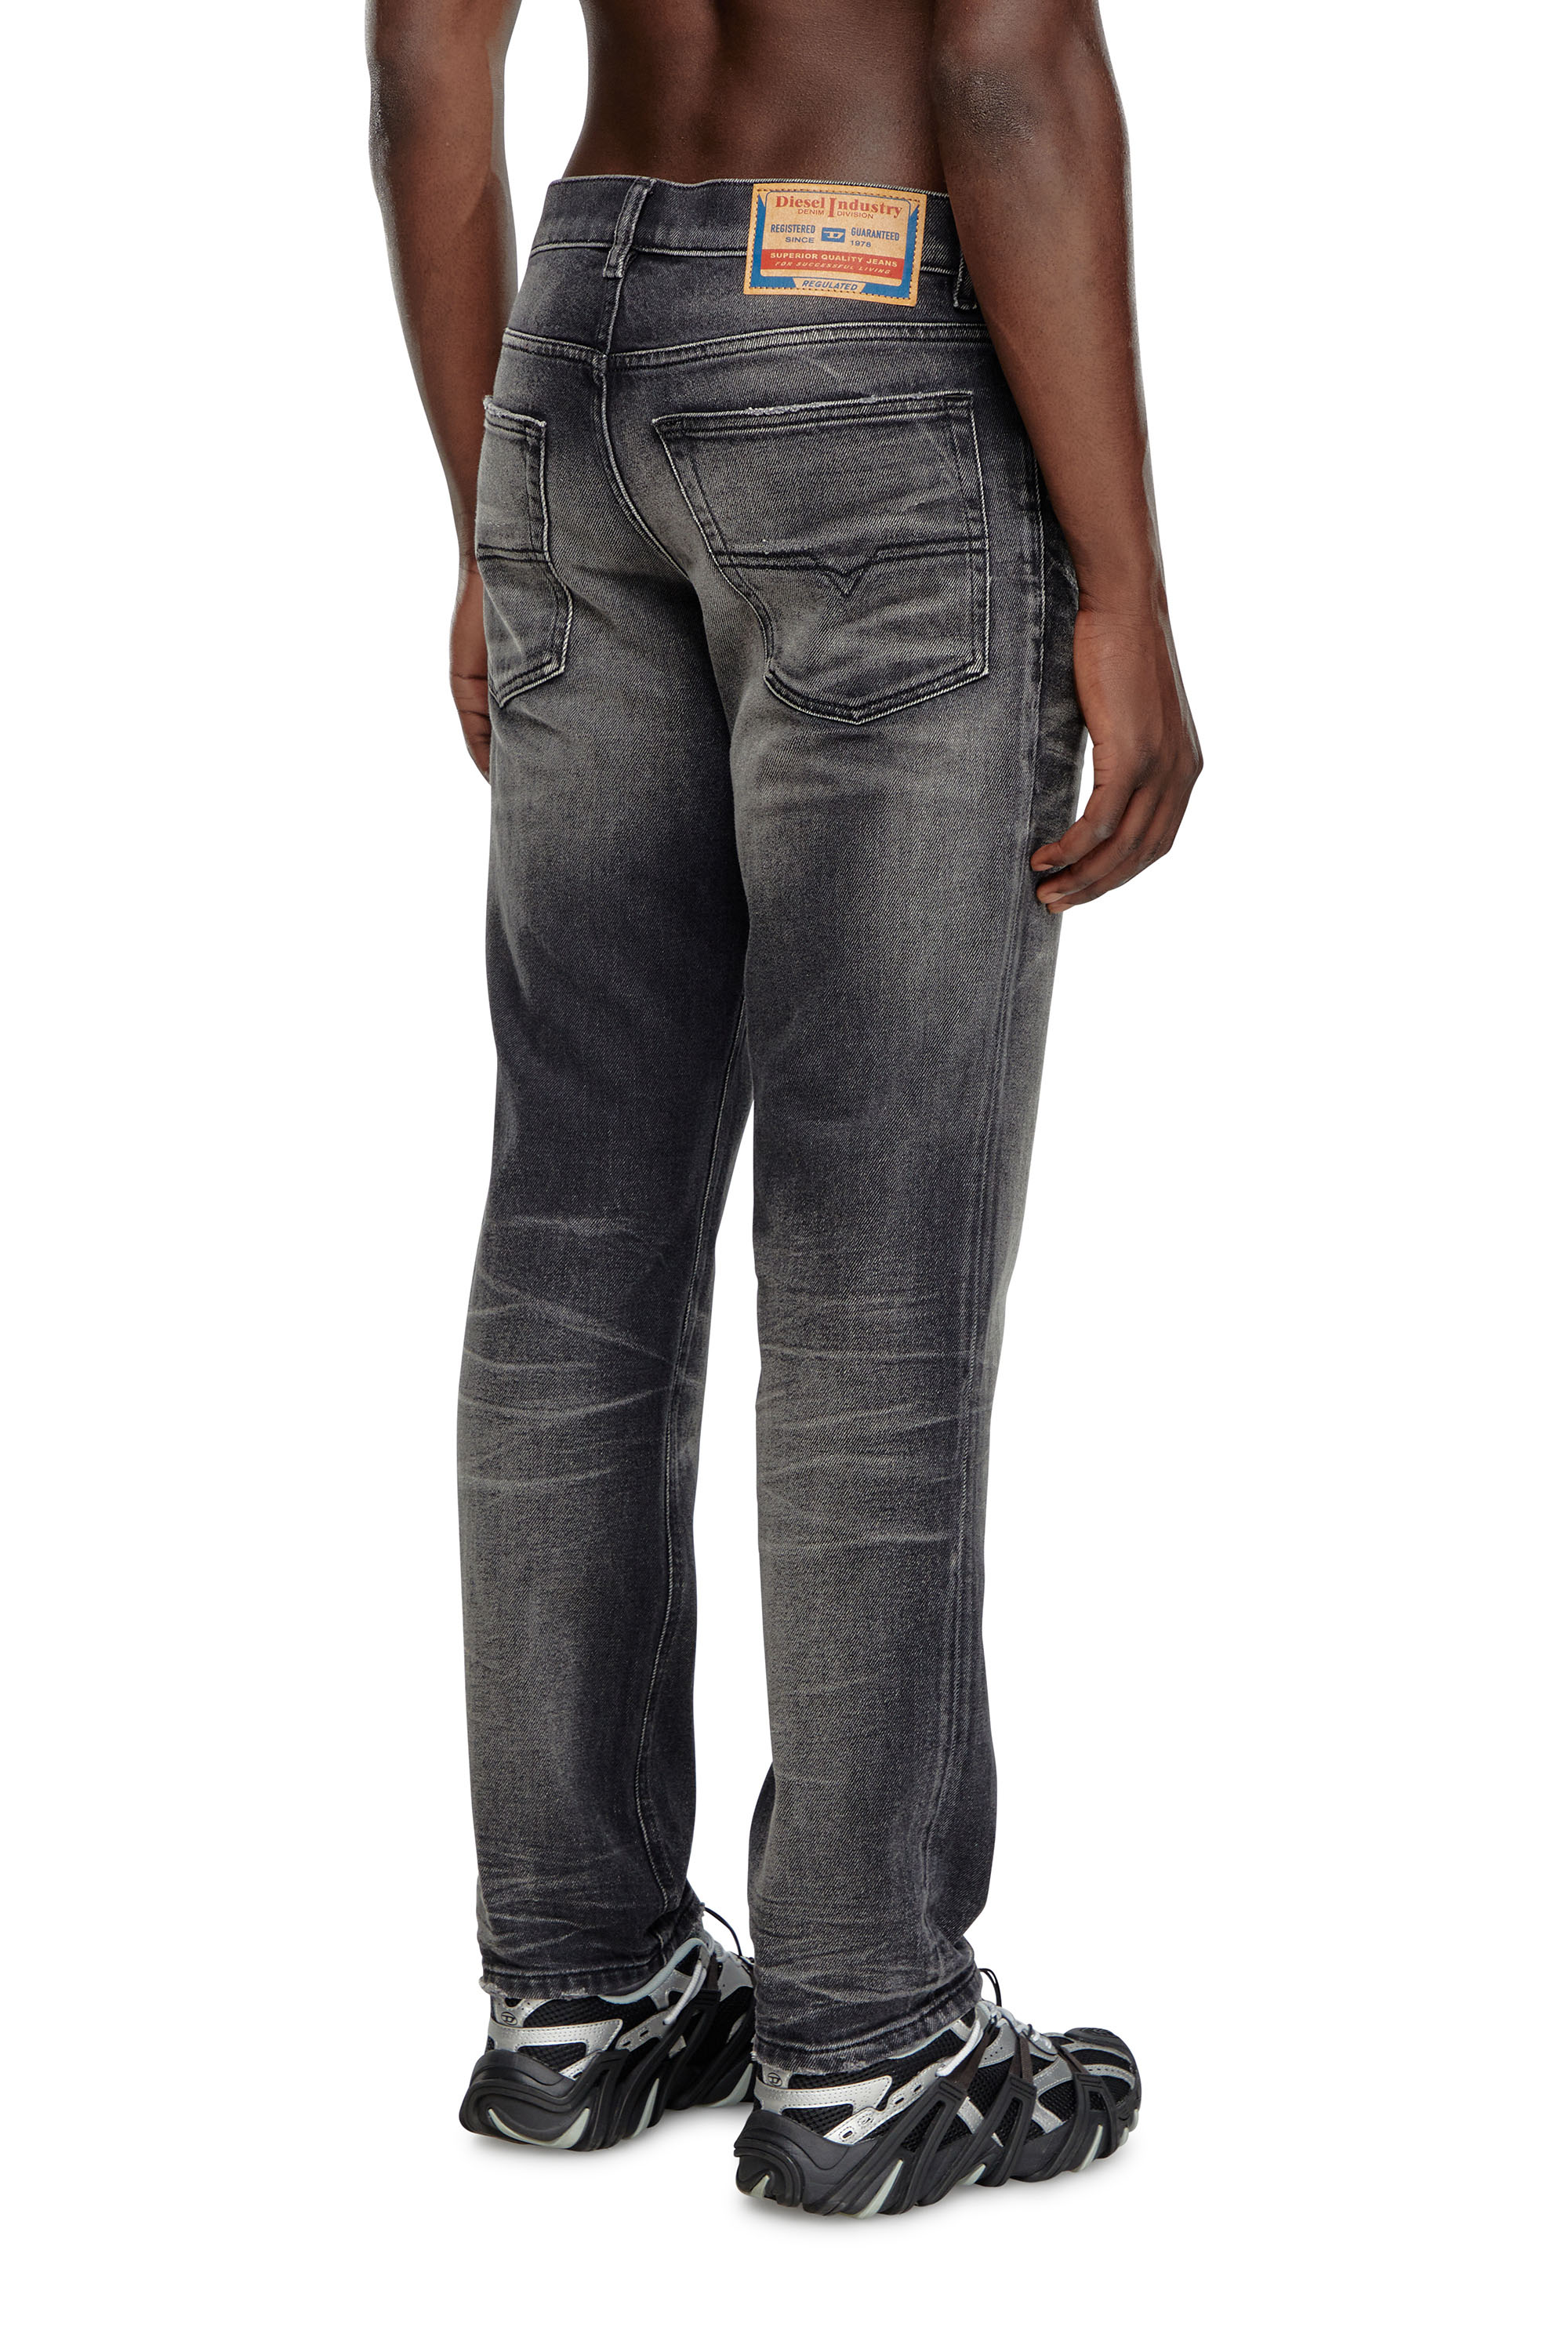 Diesel - Tapered Jeans 2023 D-Finitive 09J65, Hombre Tapered Jeans - 2023 D-Finitive in Negro - Image 3